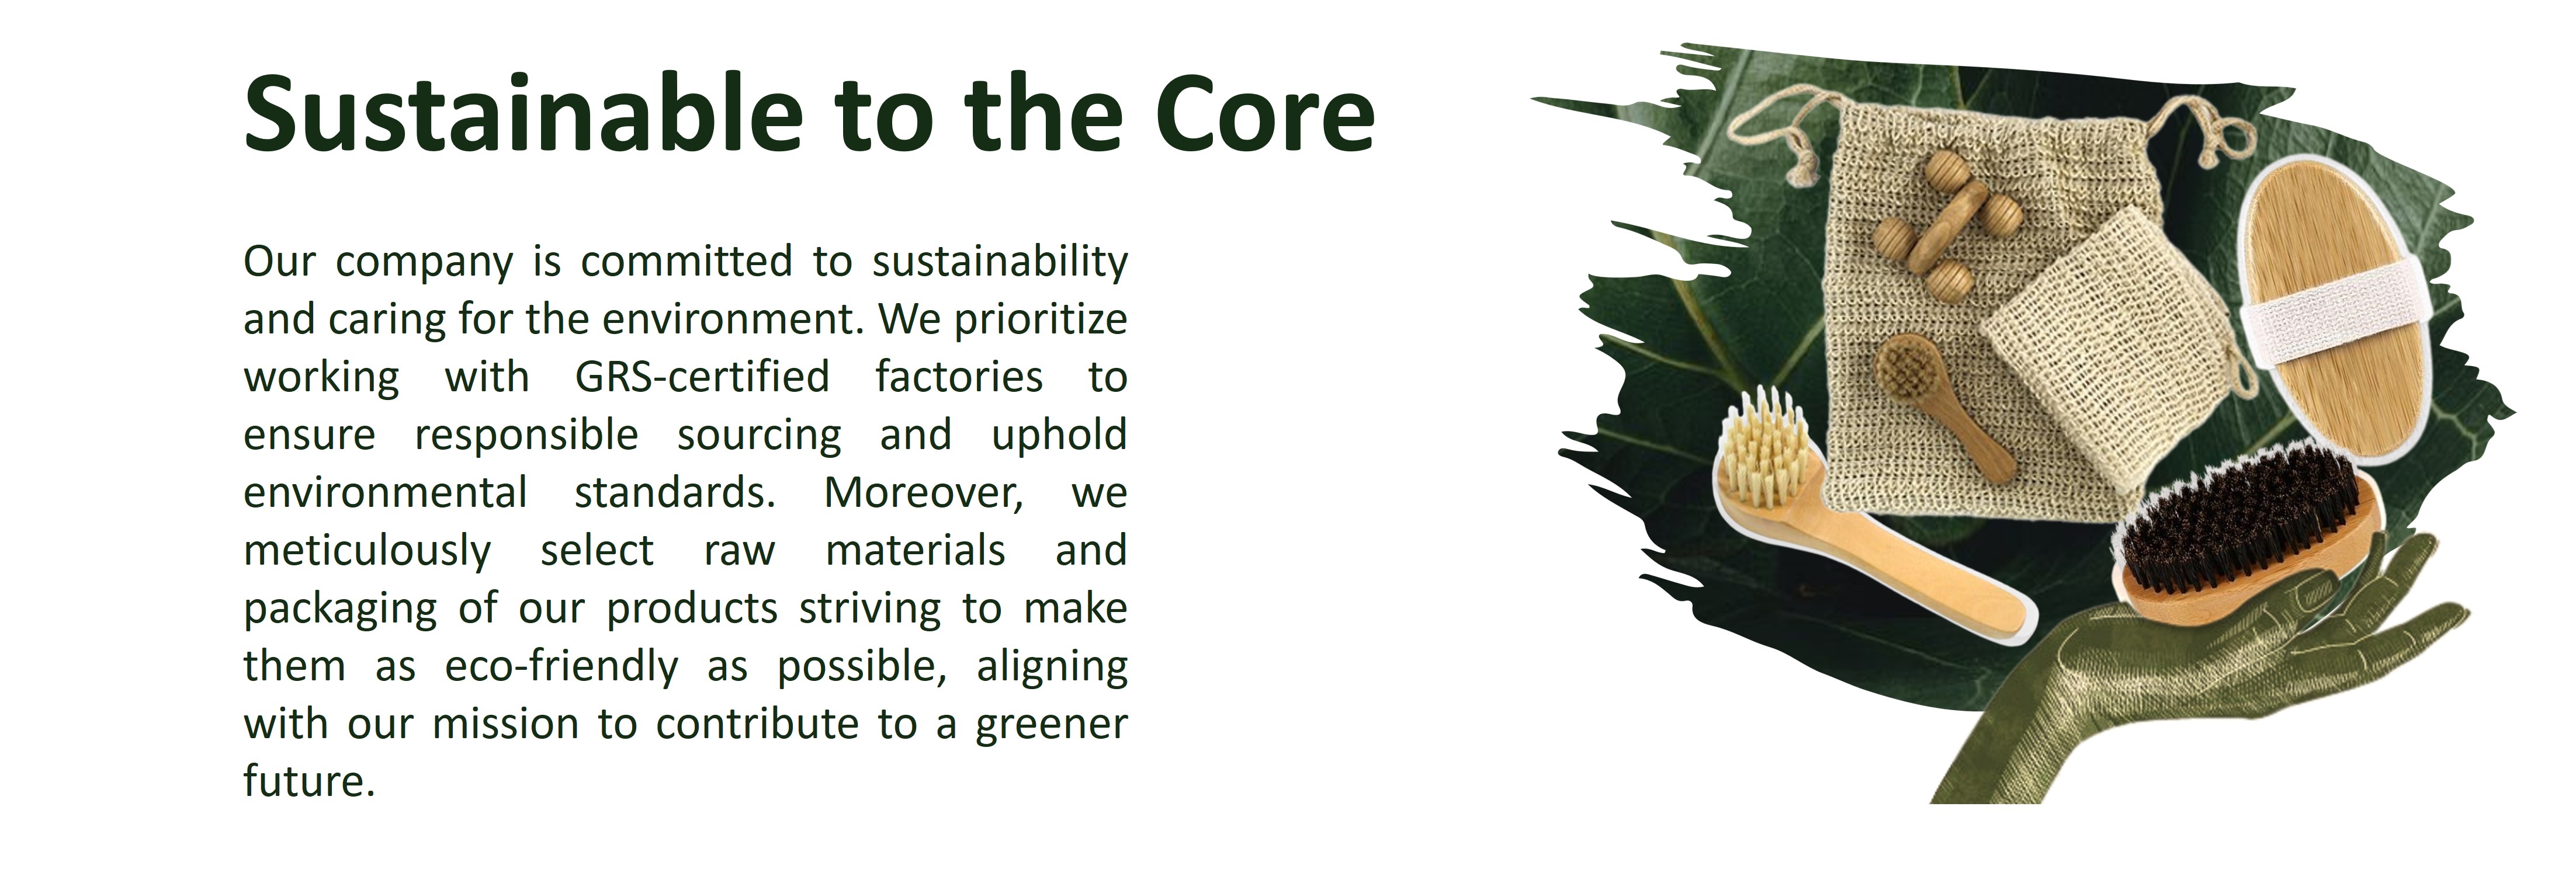 SUSTAINABLE TO THE CORE COVER